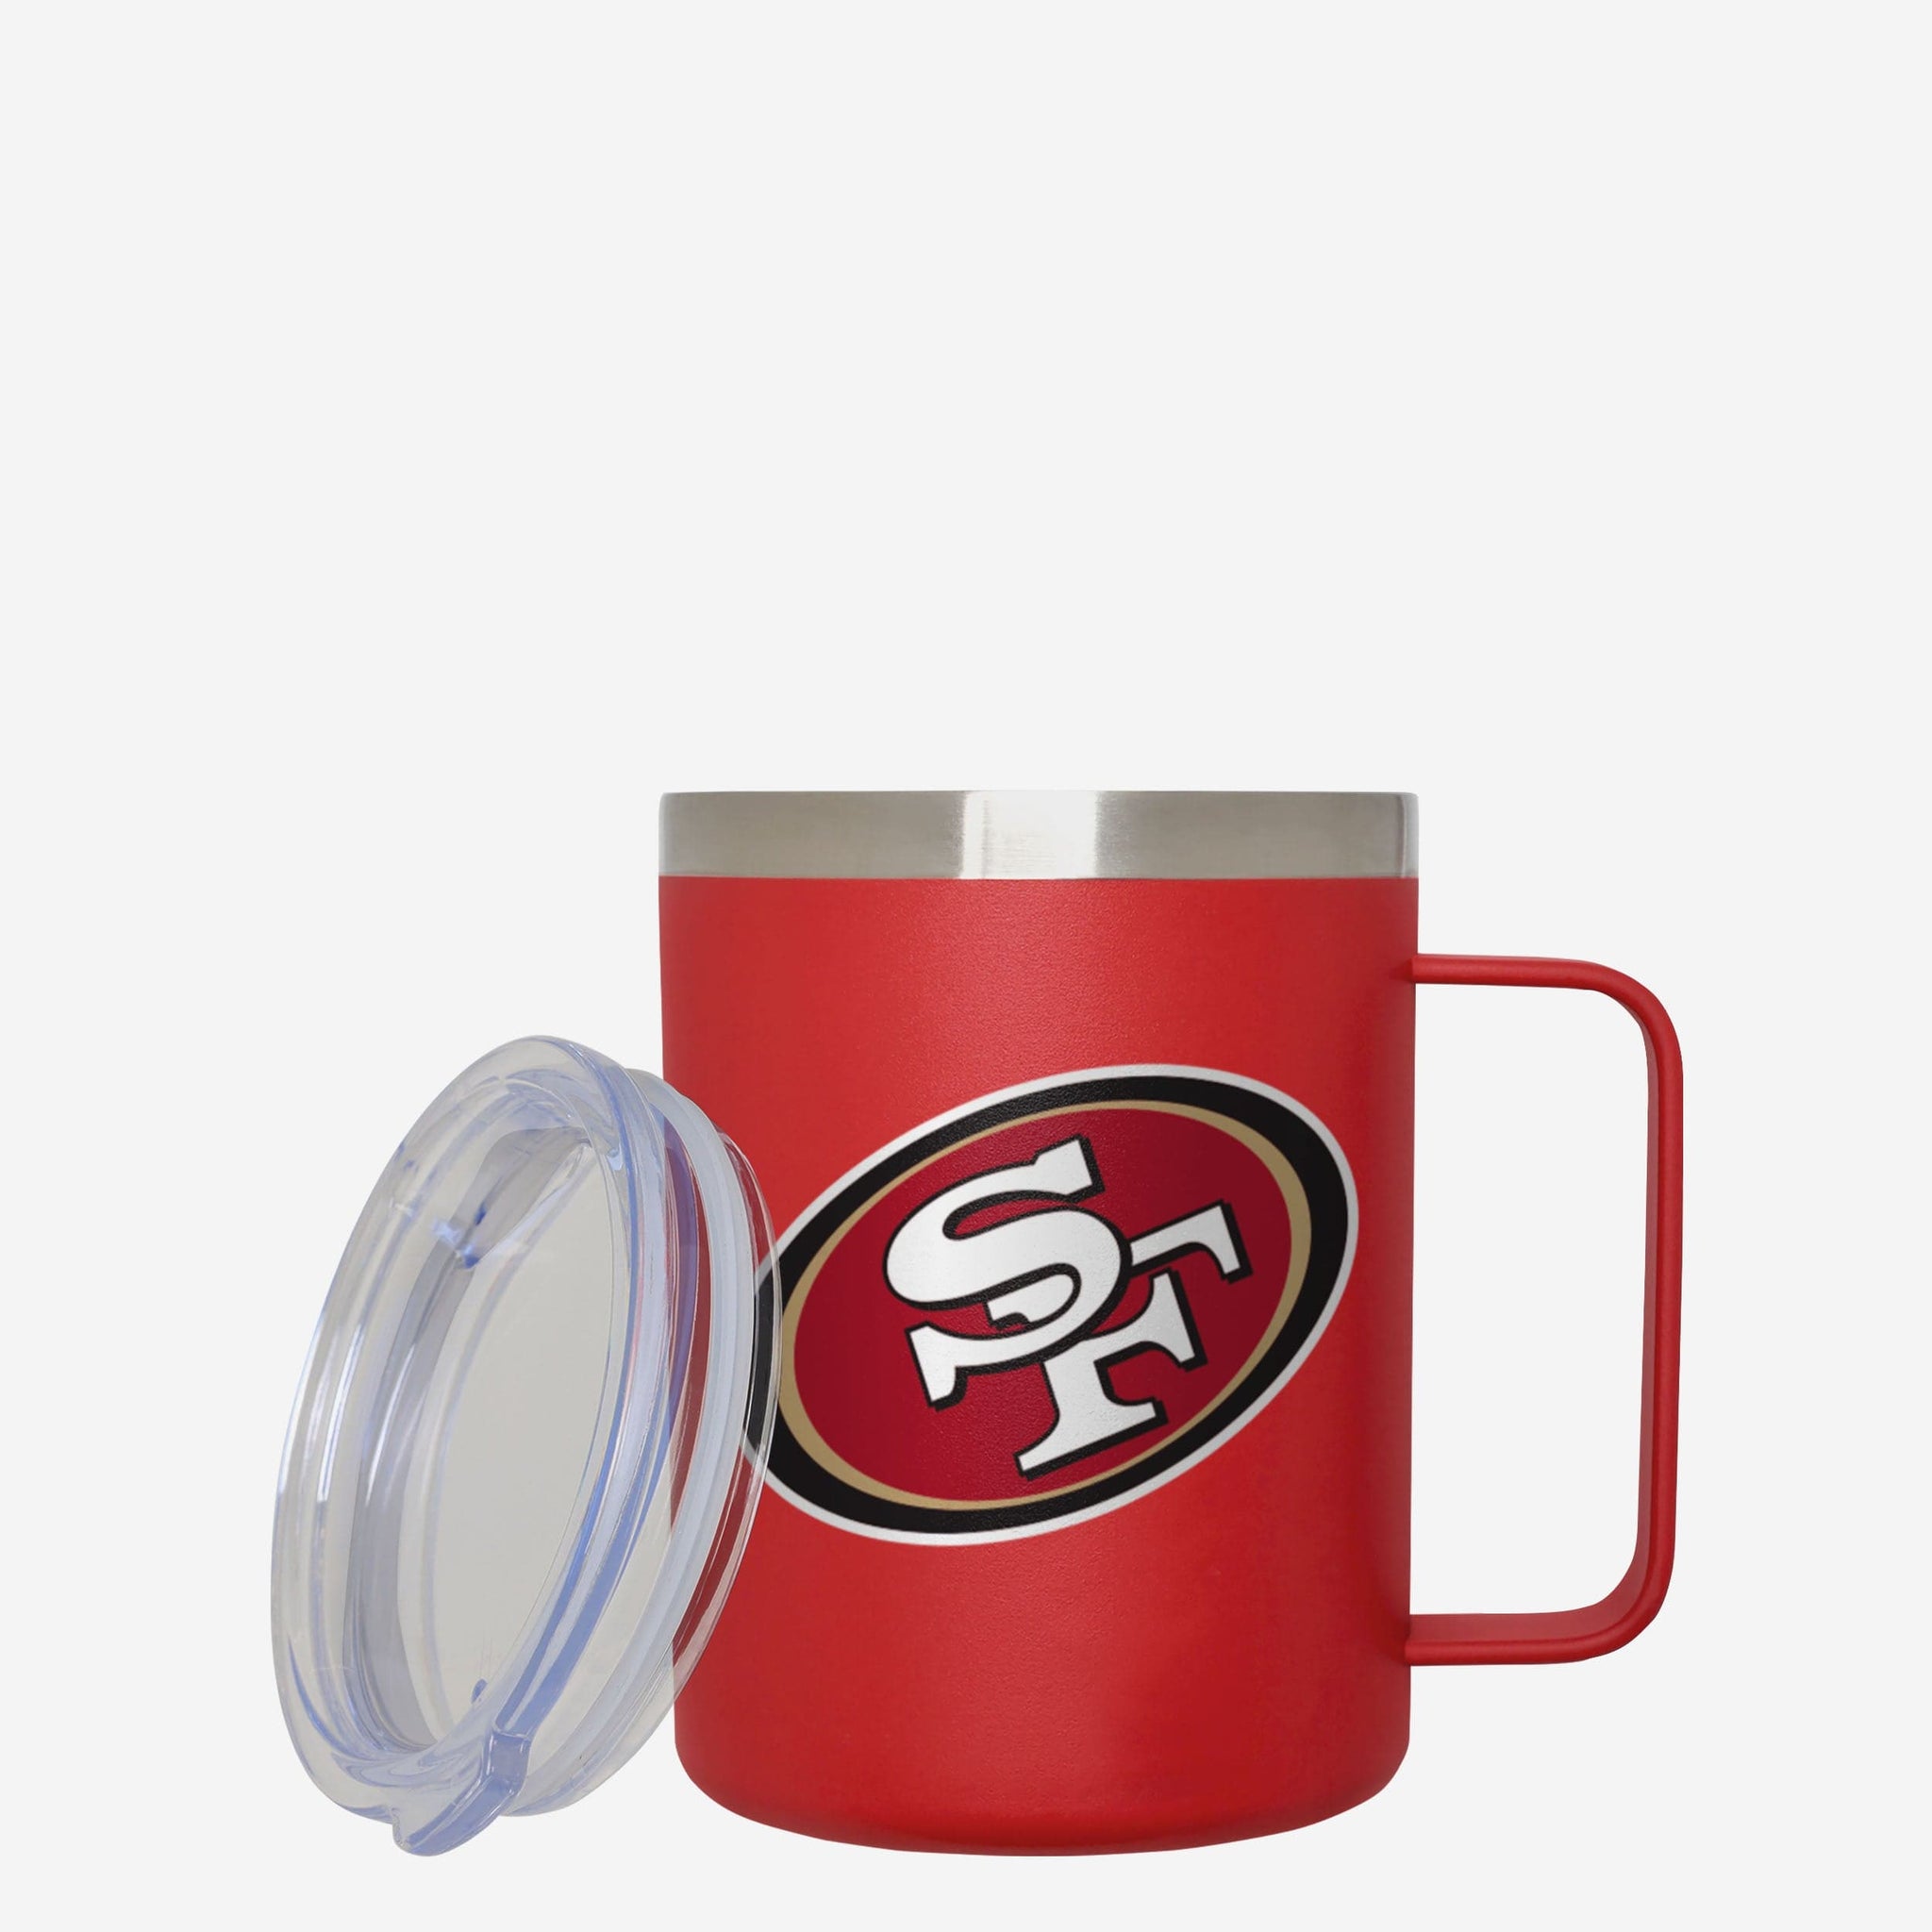  Rico Industries NFL San Francisco 49ers Personalized 15 oz  Speckle Camper Coffee Mug, Deep Laser Engraved Logo, Ceramic Camping Mug  with Red Body, Speckle Glaze : Sports & Outdoors